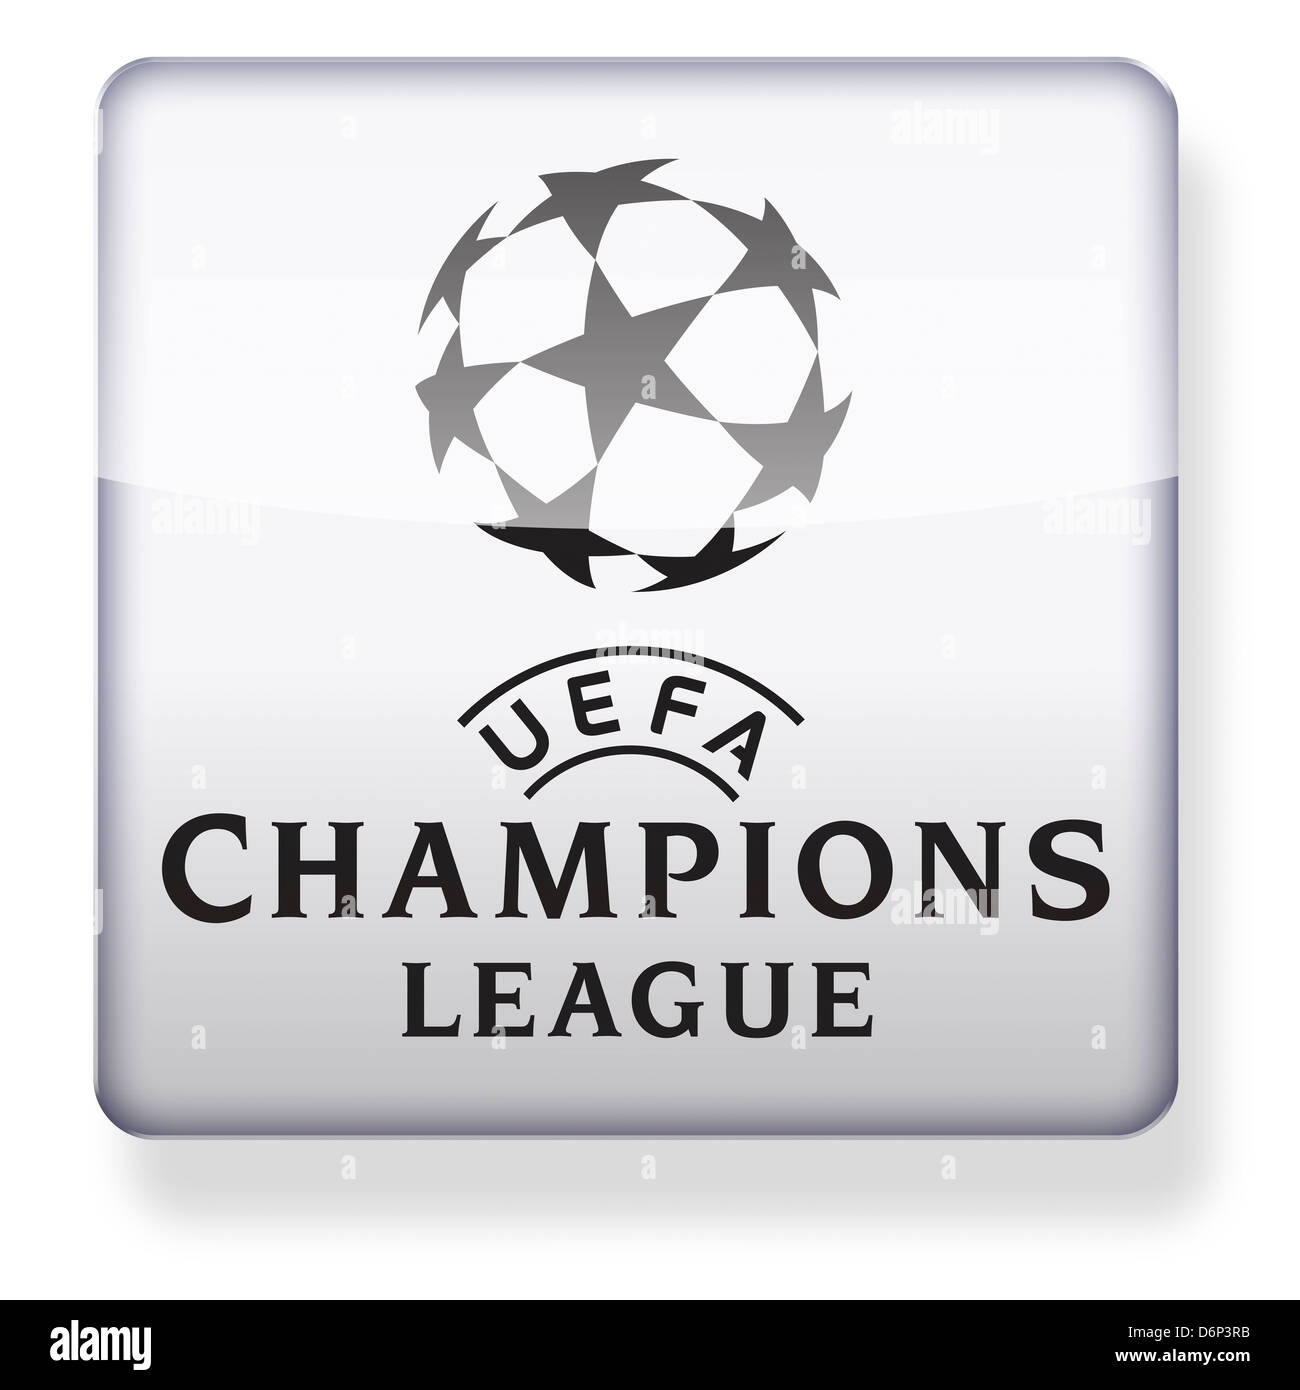 UEFA Champions League logo as an app icon. Clipping path included. Stock Photo